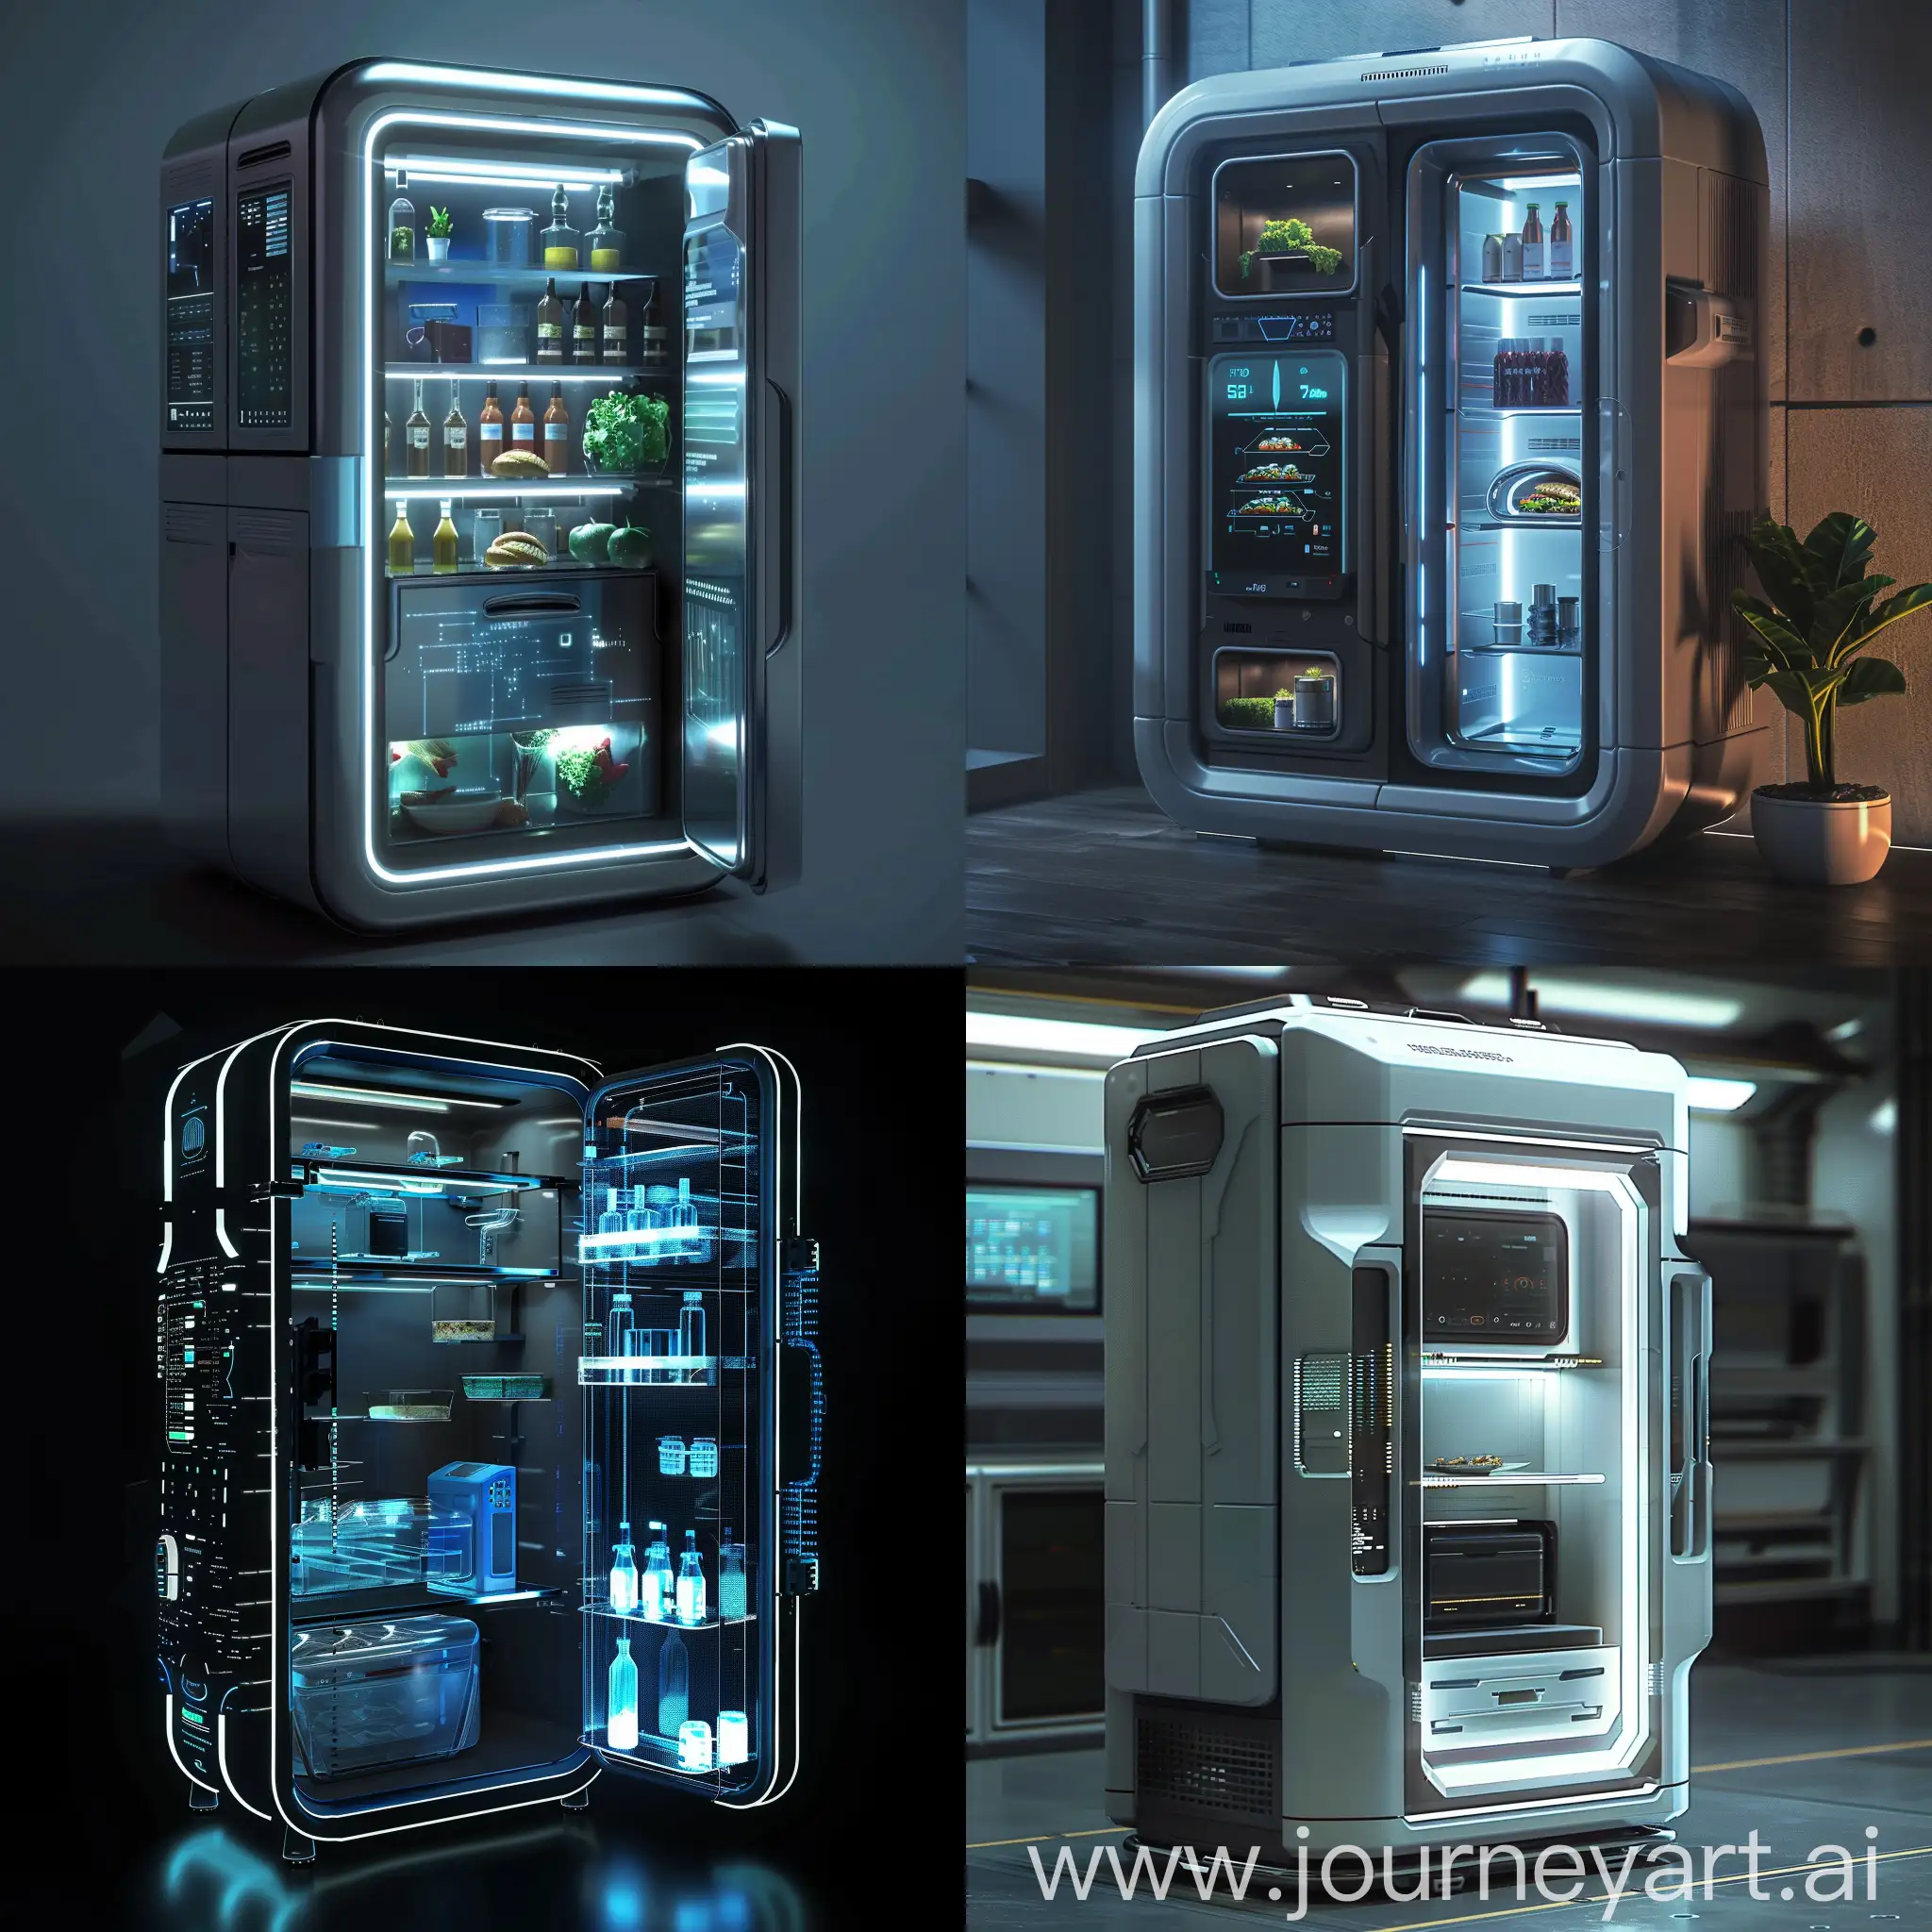 Sci-Fi fridge, Quantum Cooling System, Nano-Refrigerant Circuits, AI-Powered Inventory Management, Holographic Display, Modular Component Shelves, Thermal Electric Backup, Integrated Food Printer, OLED Touchscreen Panels, Wireless Power Supply, Smart Grid Compatibility, Sleek Aluminized Body, Transparent OLED Doors, Ambient Light Projection, Retractable Work Surfaces, Customizable Skins, Biometric Access Control, Voice and Gesture Recognition, Solar Panel Top, Magnetic Levitation Base, Interactive Projector System, In Unreal Engine 5 Style --stylize 1000